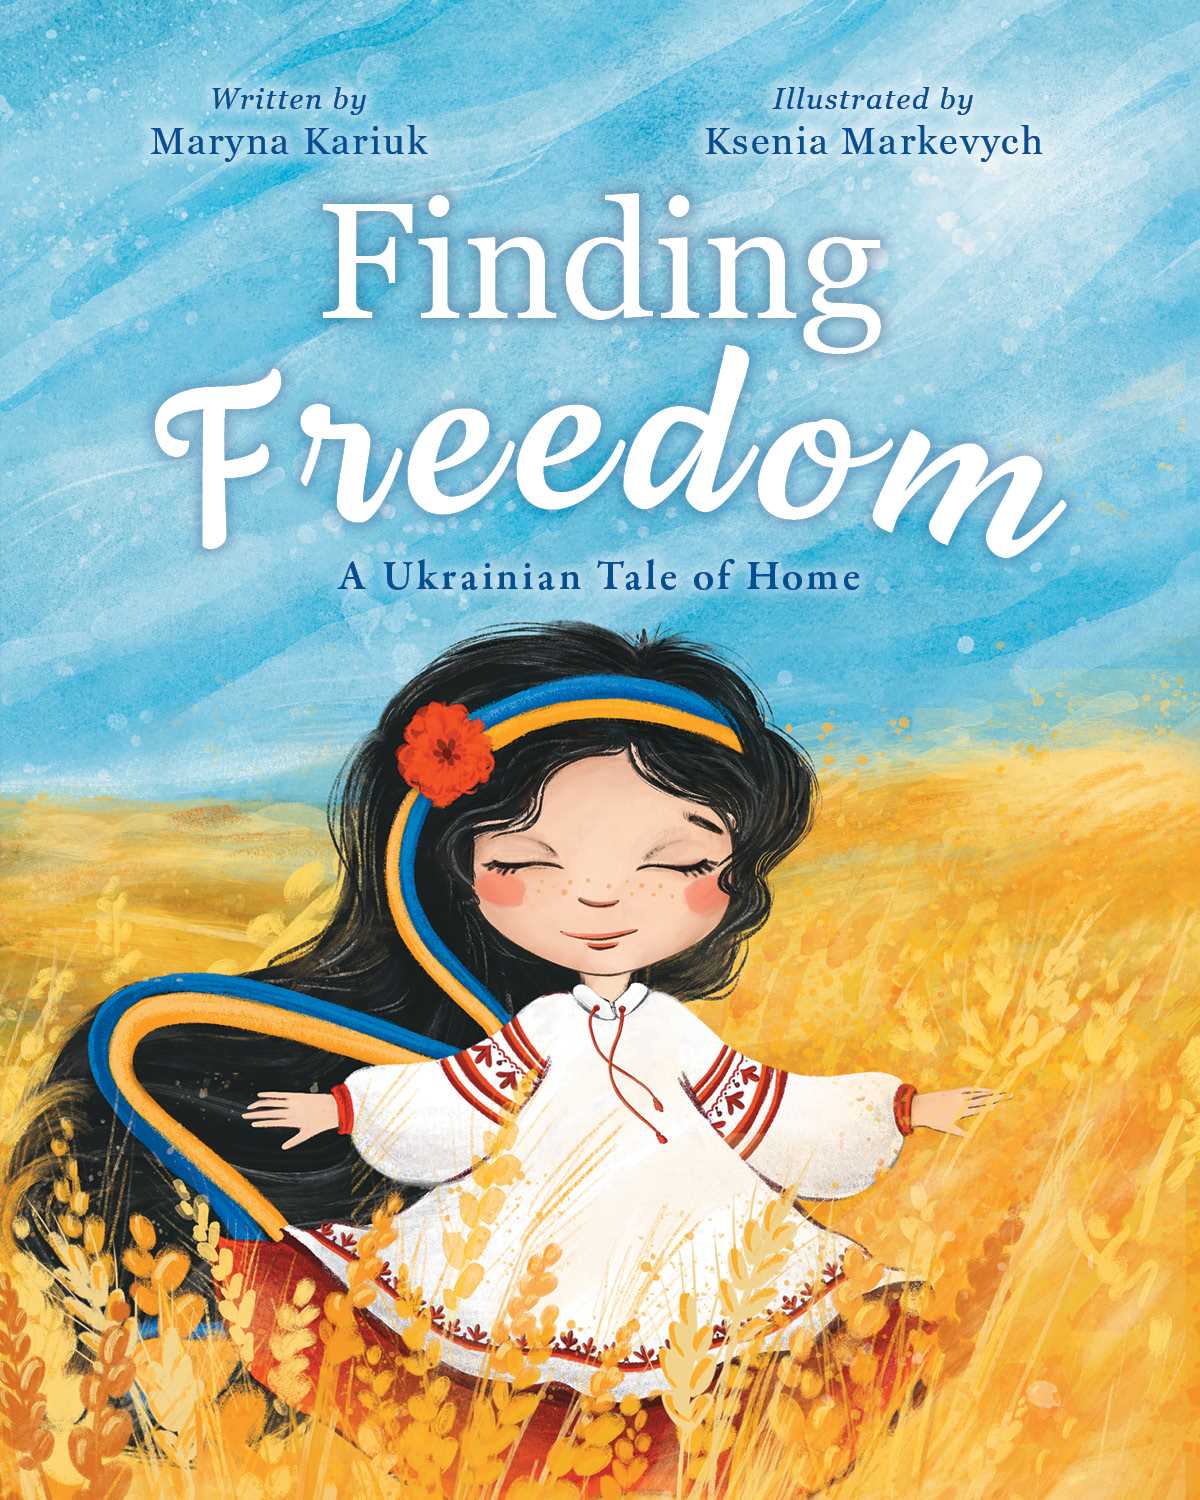 Finding Freedom: A Ukrainian Tale of Home